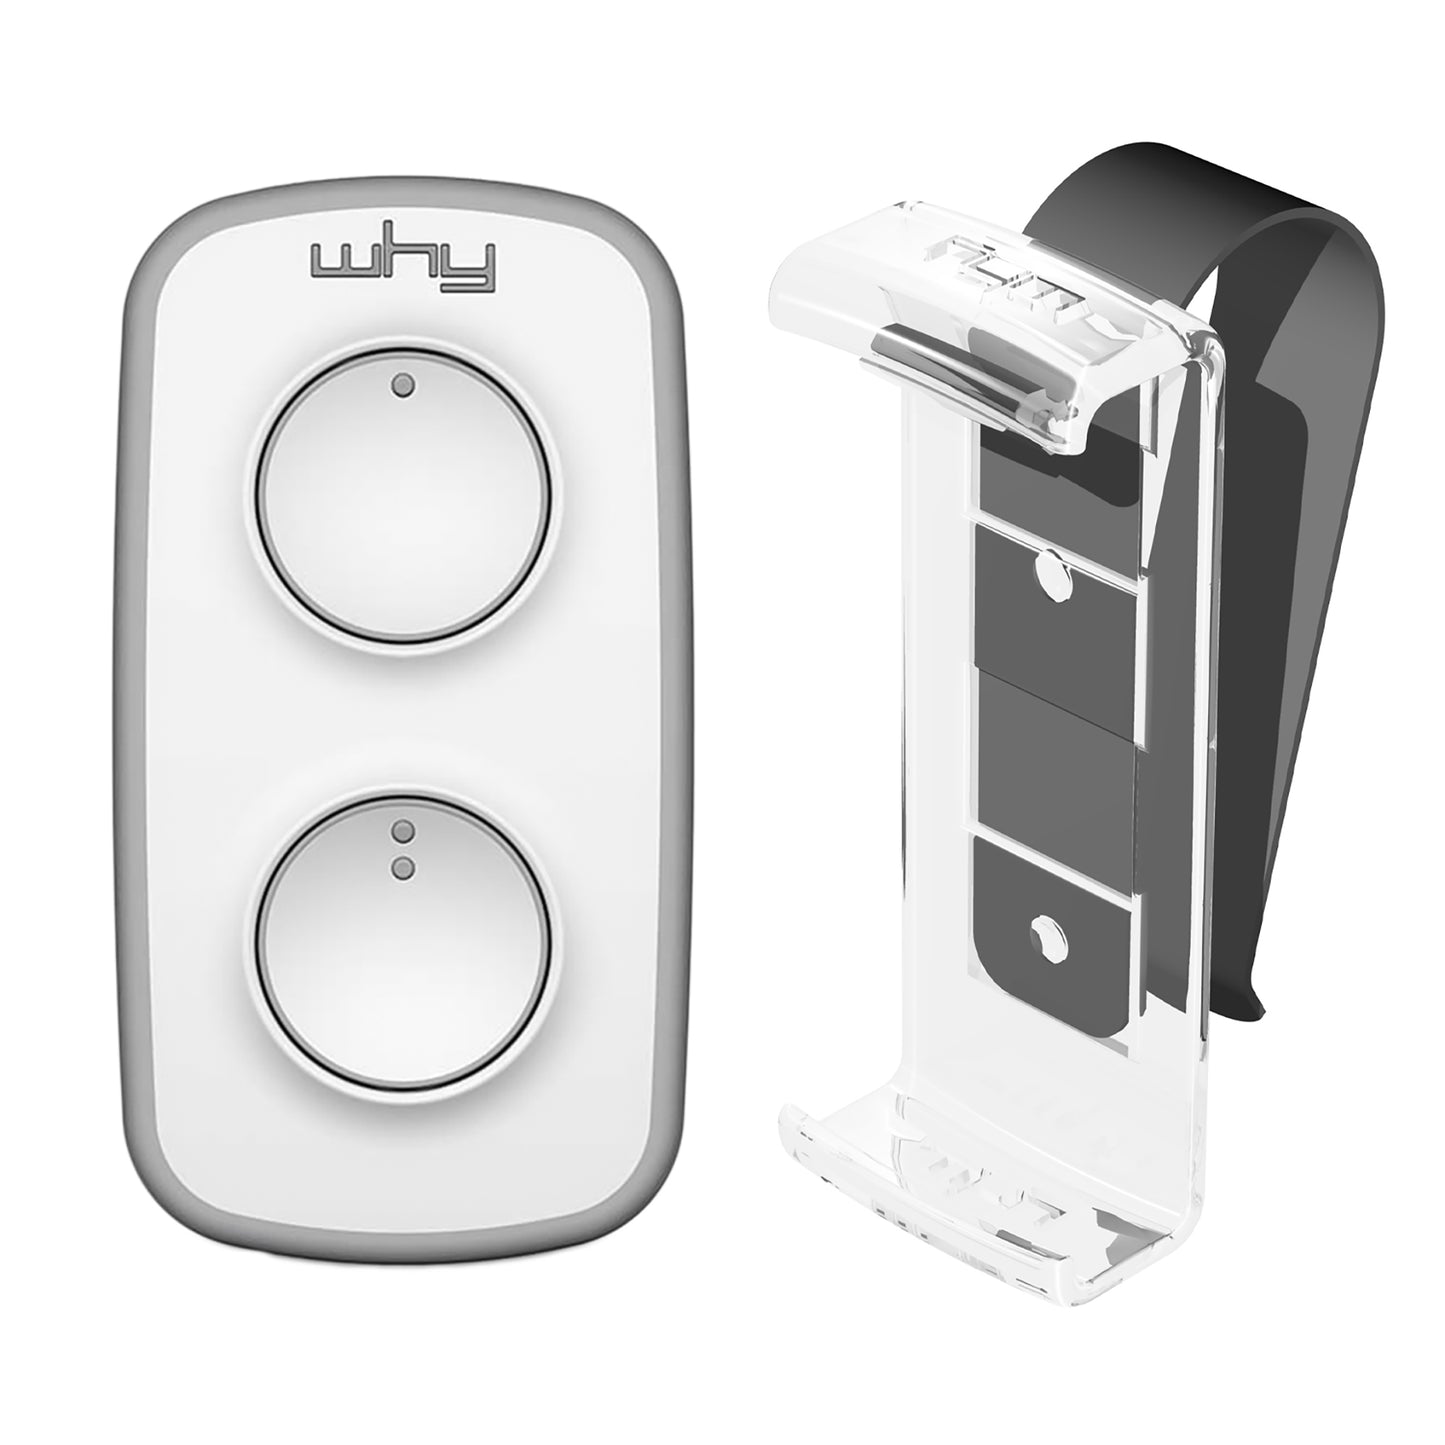 WHY EVO MINI Multi-frequency rolling code remote control from 280 to 868 MHz with Visor Clip, programmable self-learning gate opener, wide-range remote control with 4 buttons, Pure Gray white